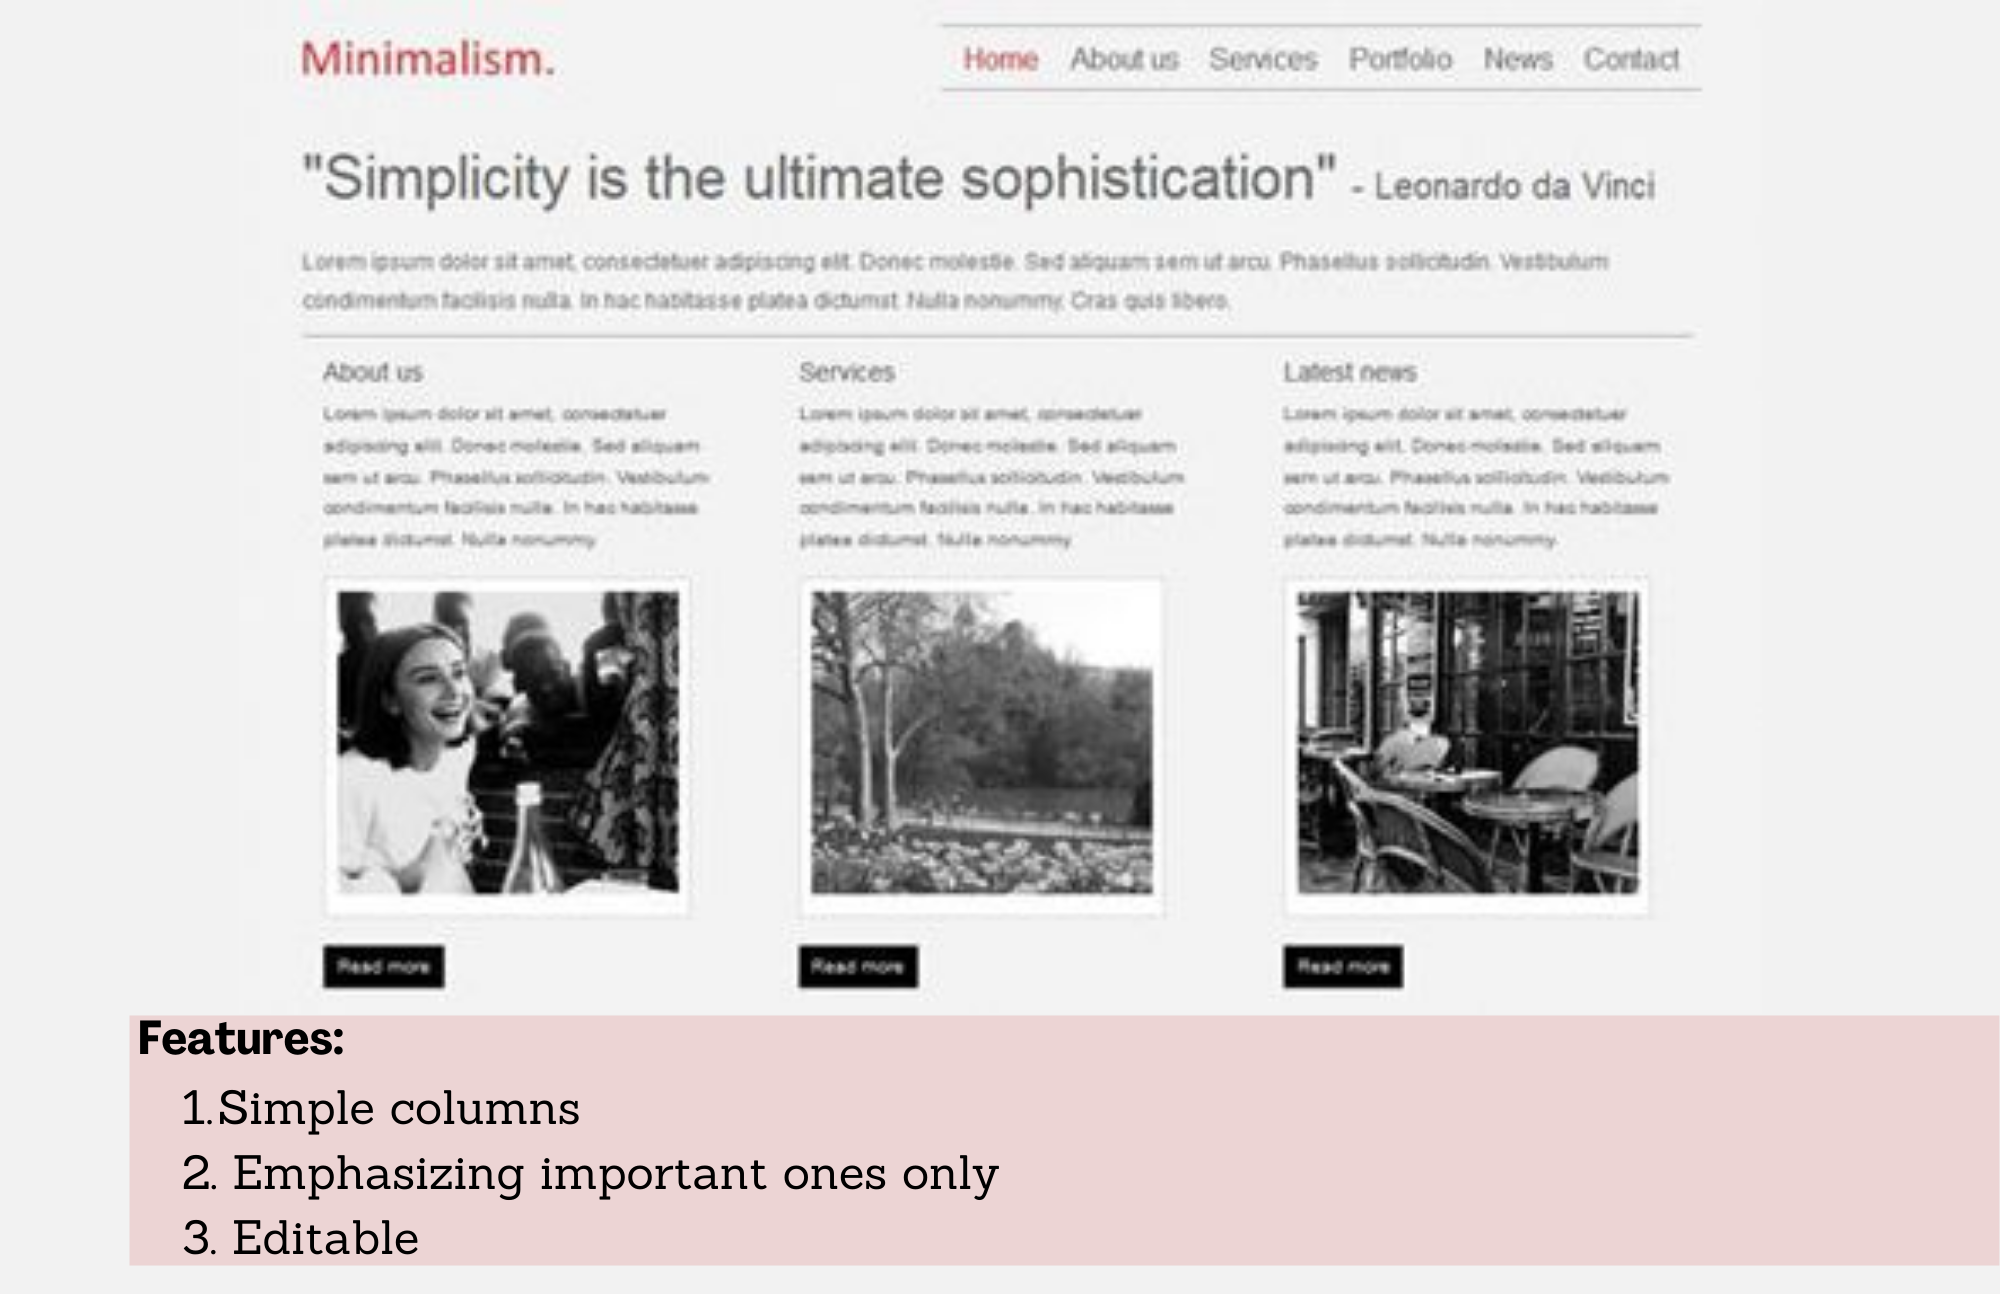 The website for minimalism and its three features